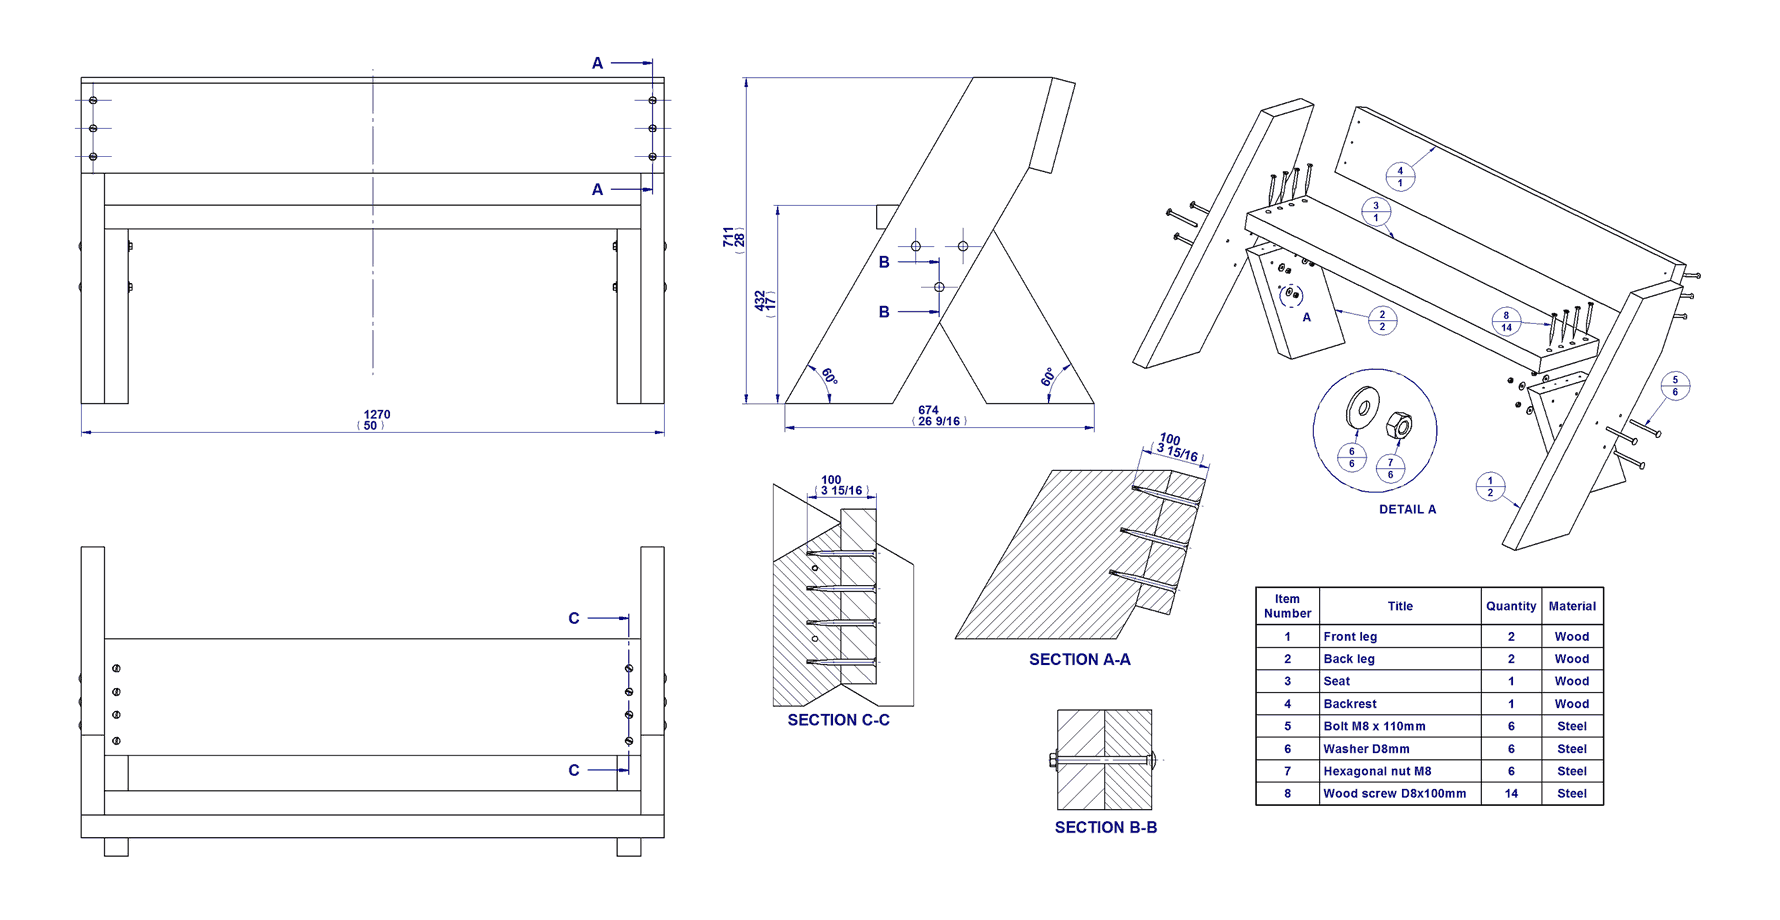 Aldo Leopold bench plan - Parts drawings (High resolution image)